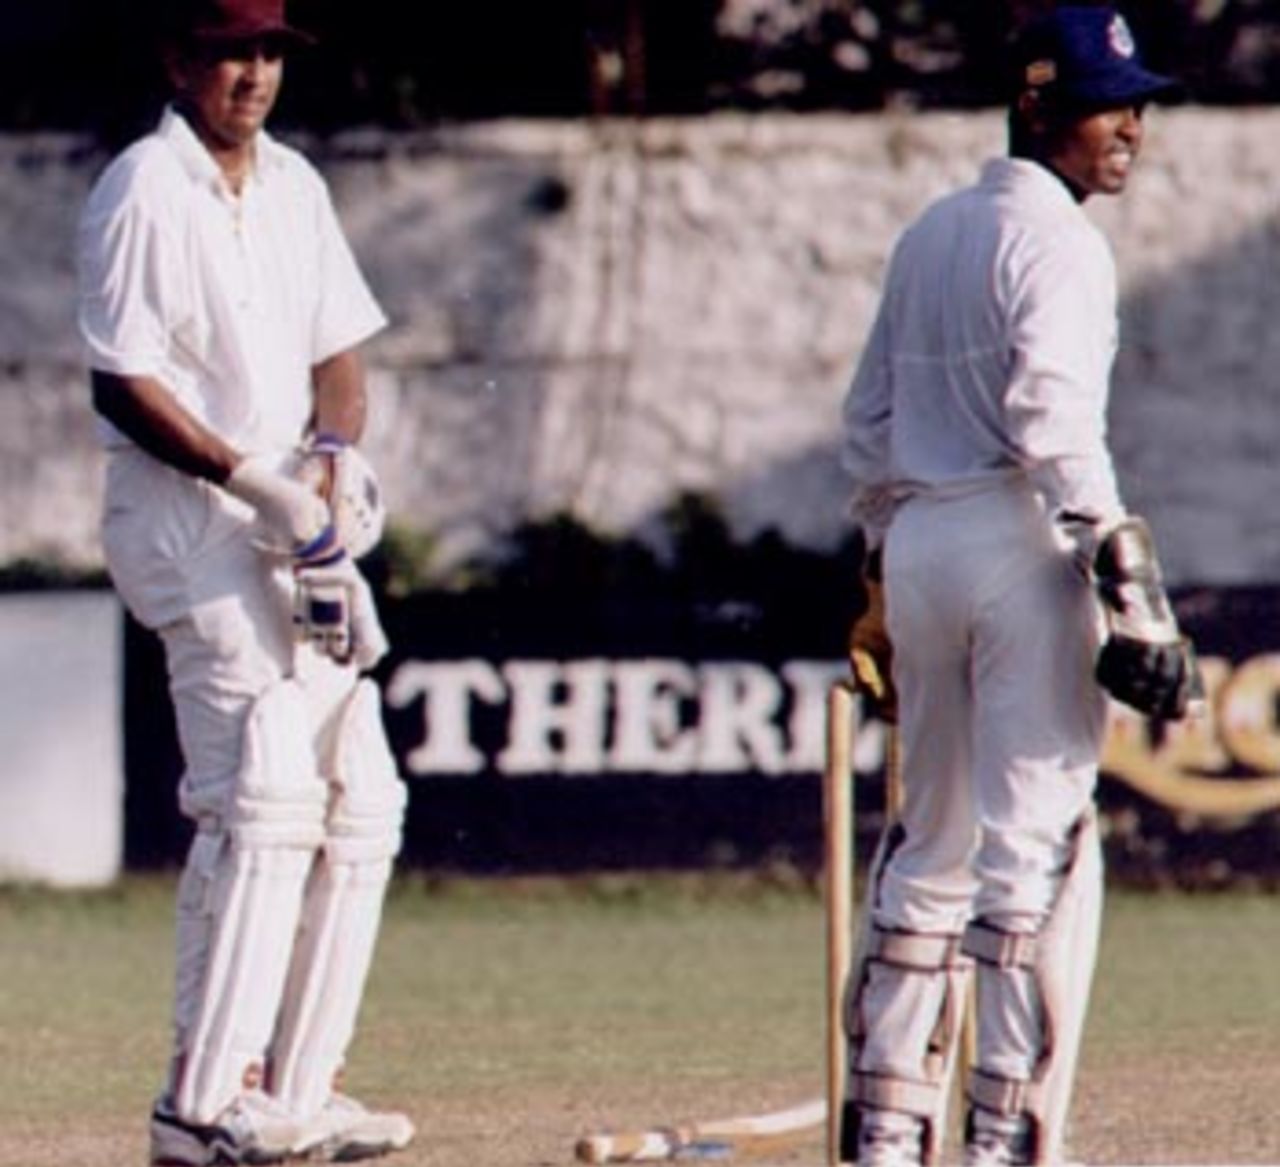 Mahanama getting ready to face another ball with Kalu setting the